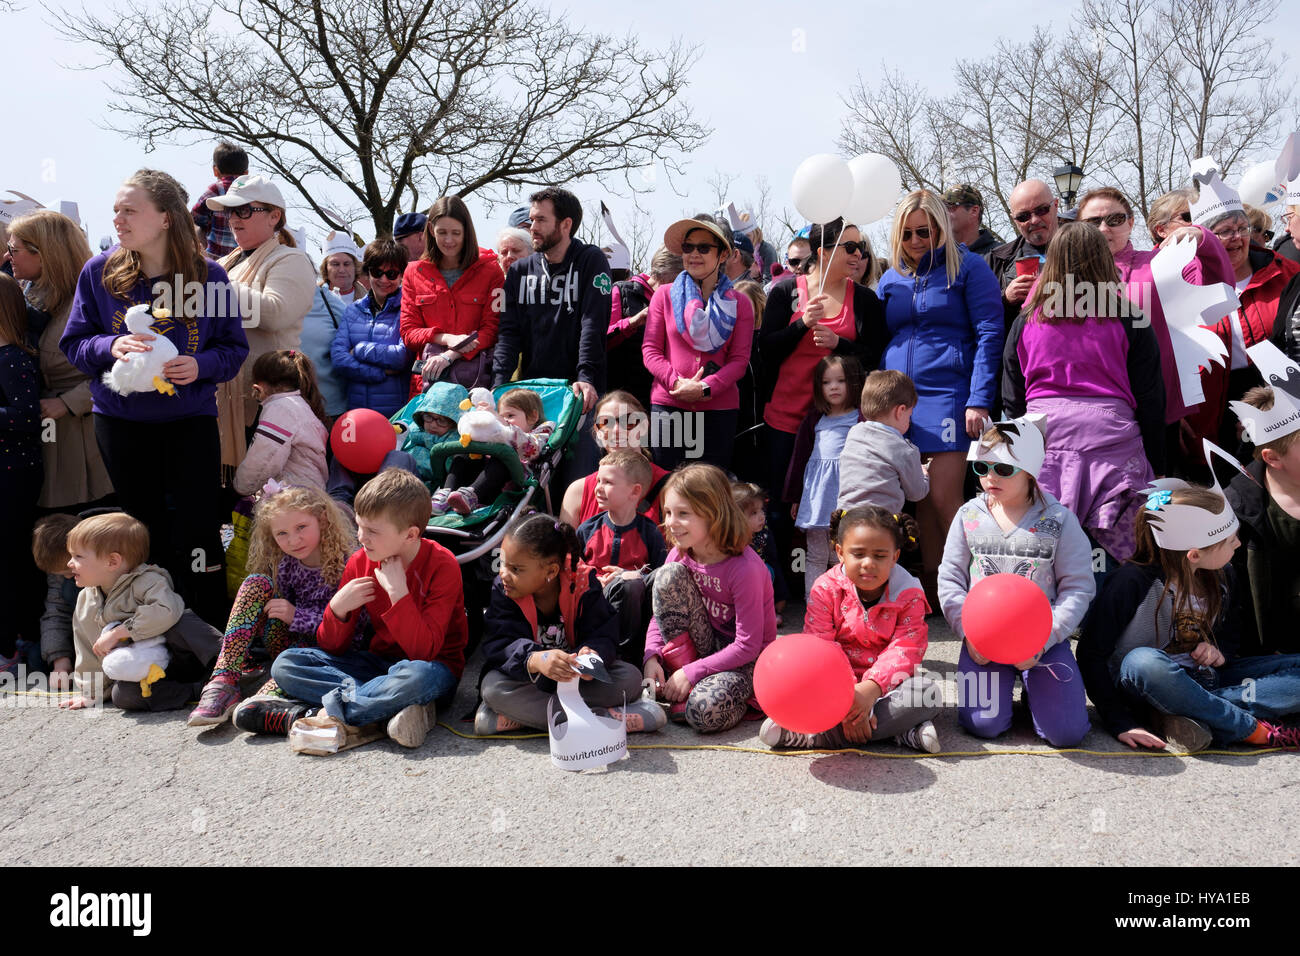 Stratford, Ontario, Canada, 2nd Apr, 2017. Kids, children line up to watch the Stratford's Annual Swan Parade, when the city's flock of mute swans (Cygnus olor) returns to the Avon River, in celebration of the arrival of Spring. Credit: Rubens Alarcon/Alamy Live News. Stock Photo